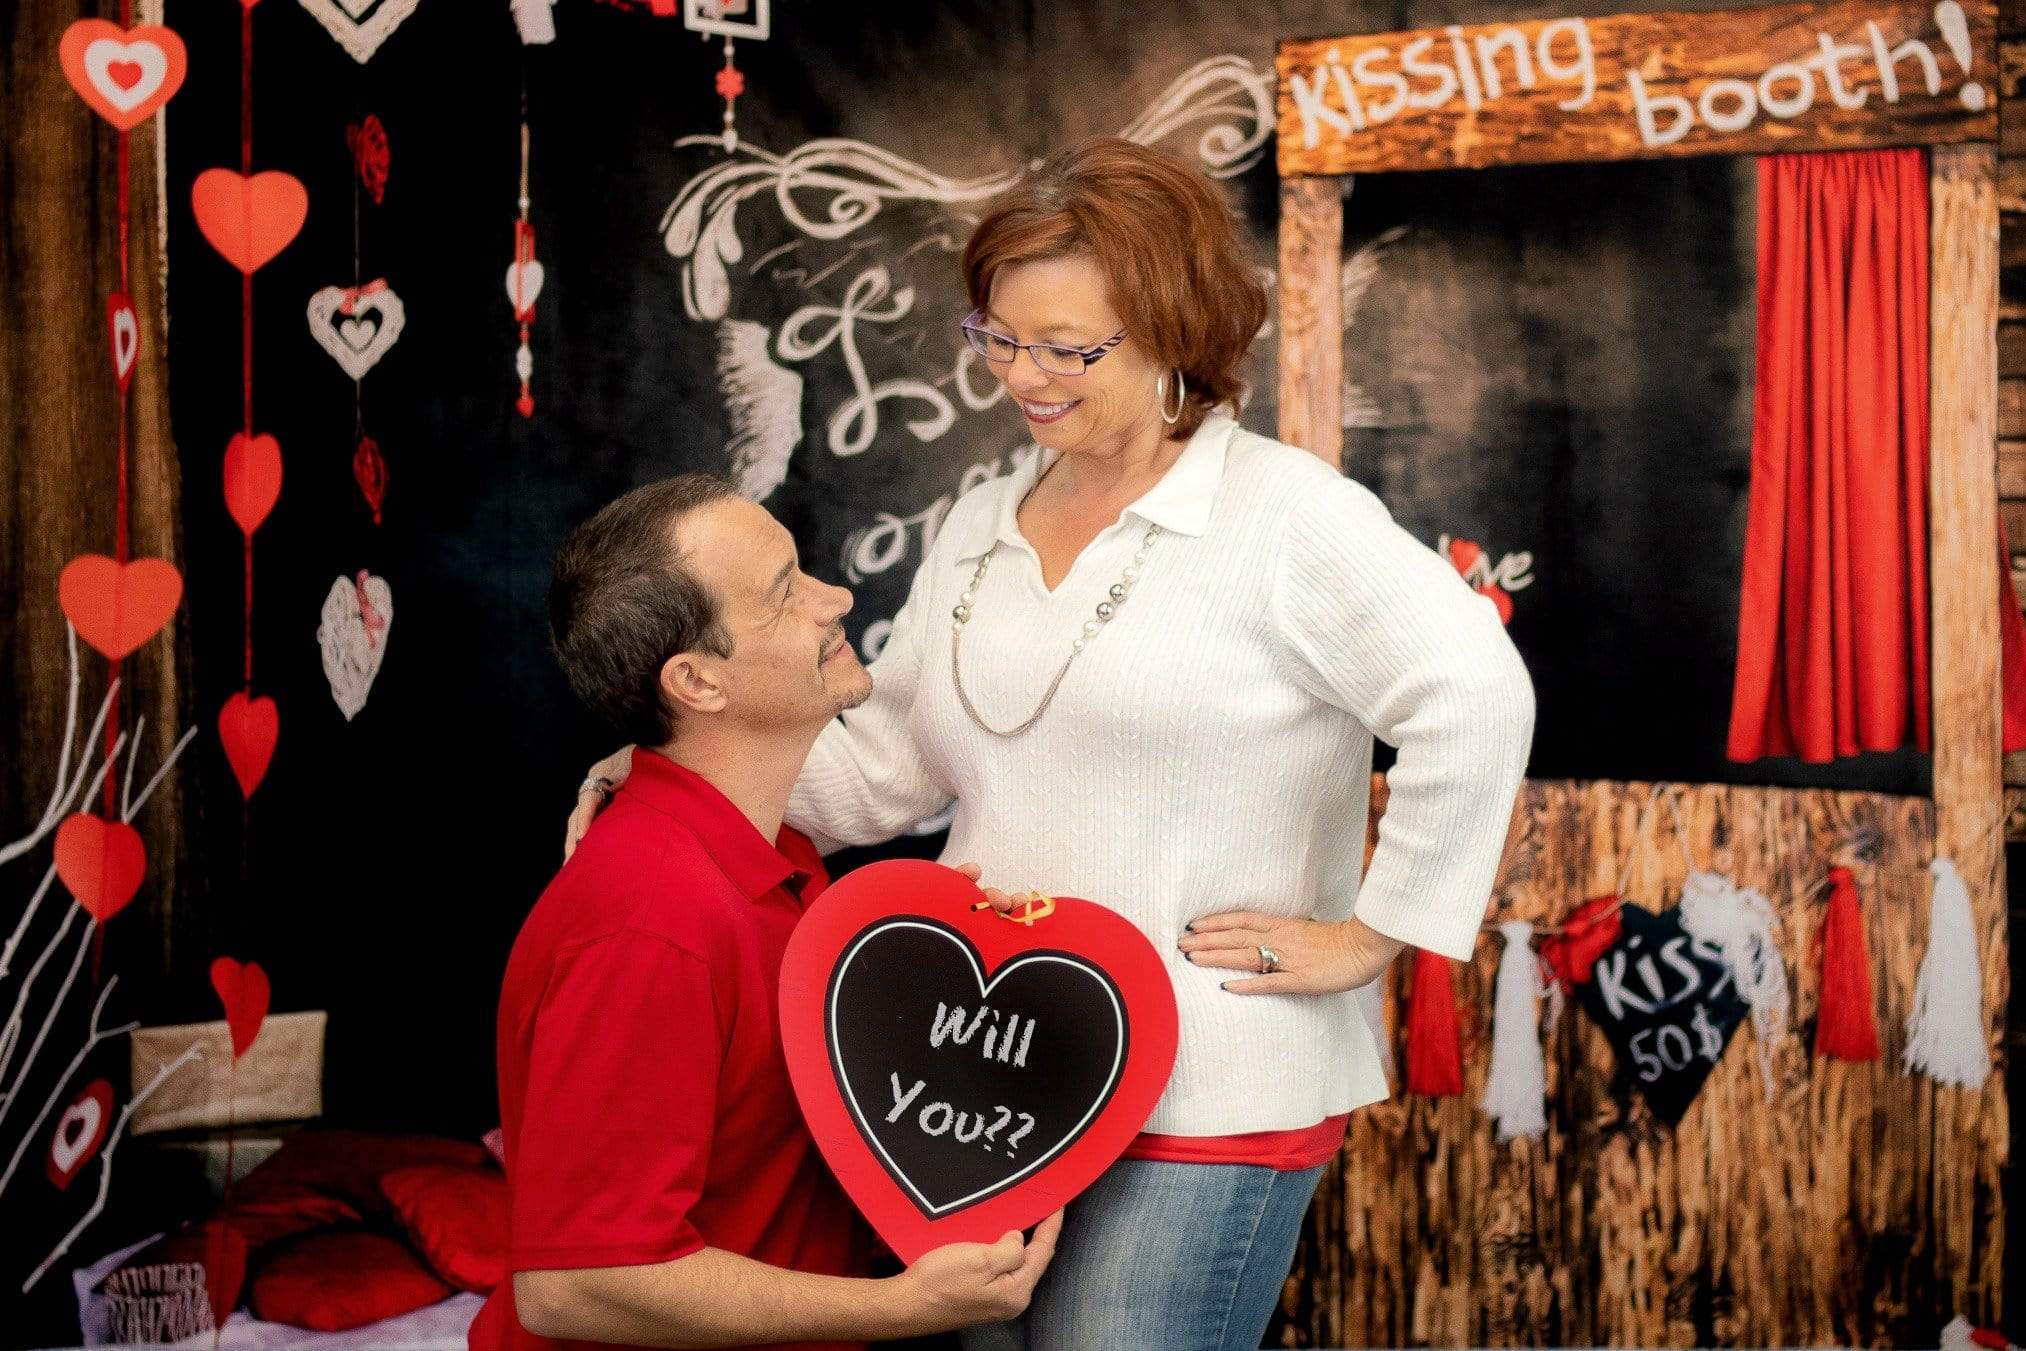 Katebackdrop£ºKate Kiss Booth Valentines Backdrop for Photography